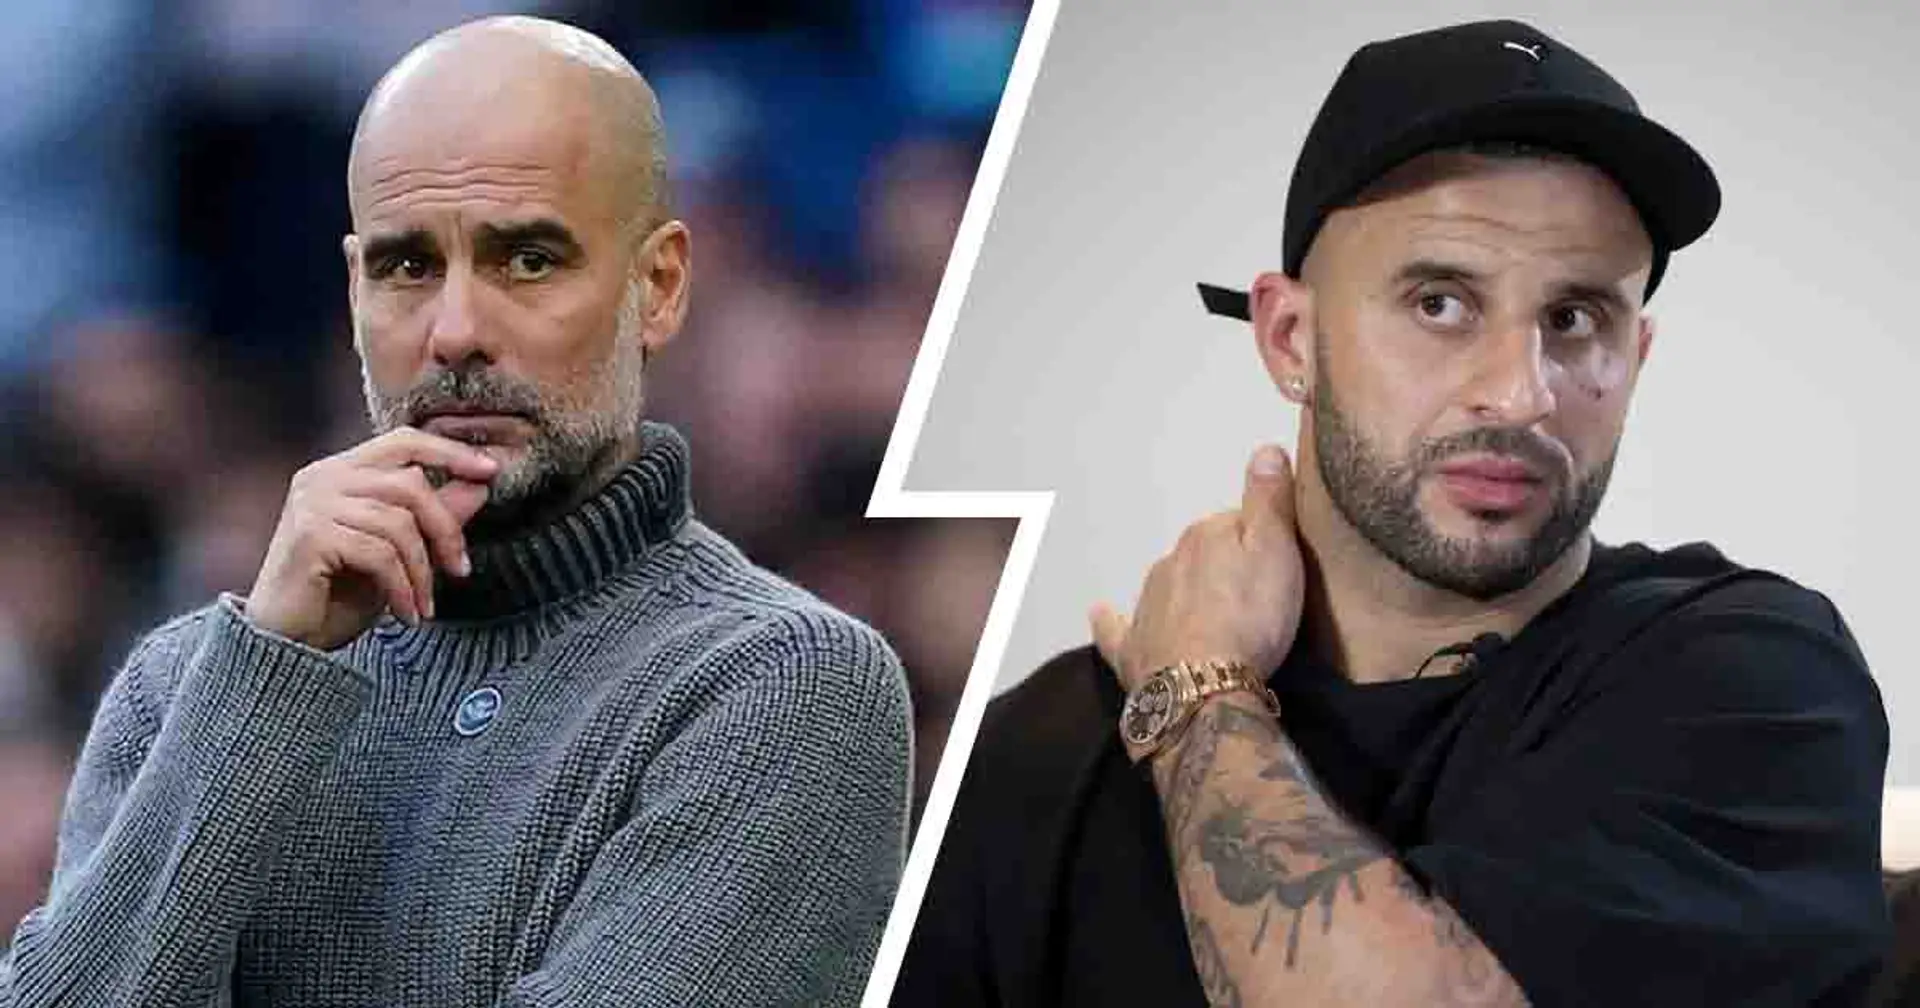 Kyle Walker names two managers who helped him during cheating scandal